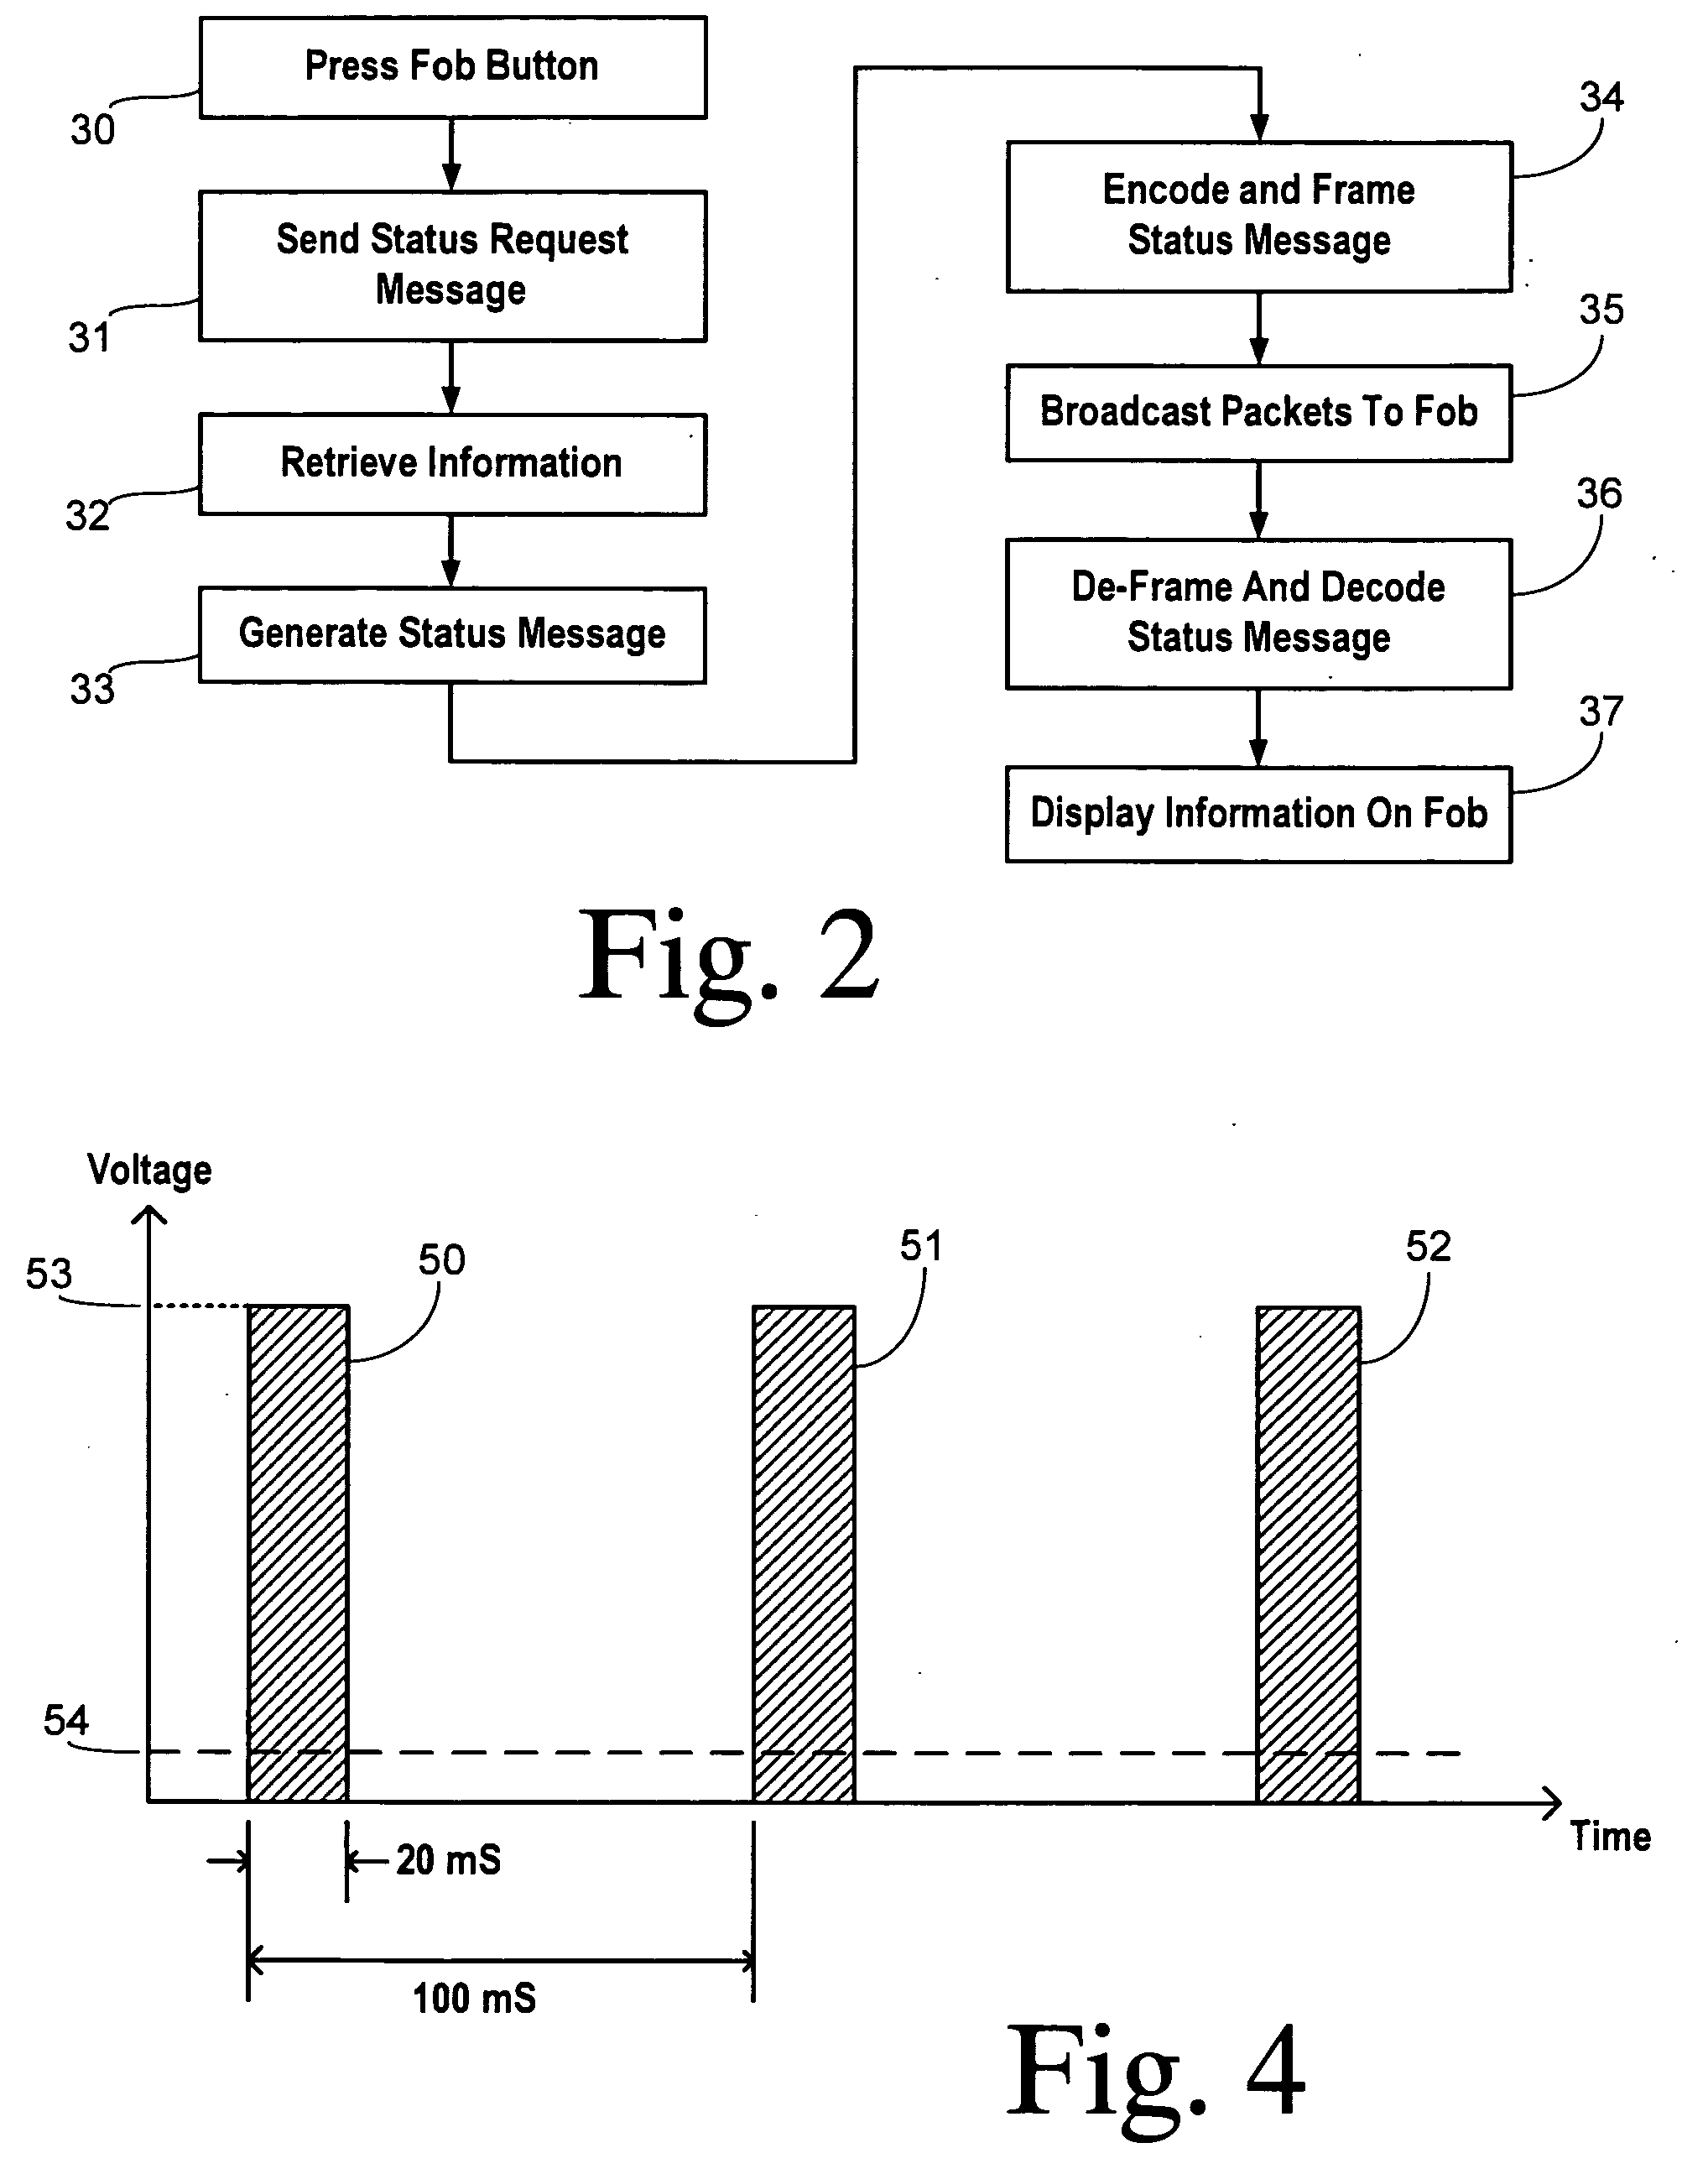 Remote keyless entry system with two-way long range communication